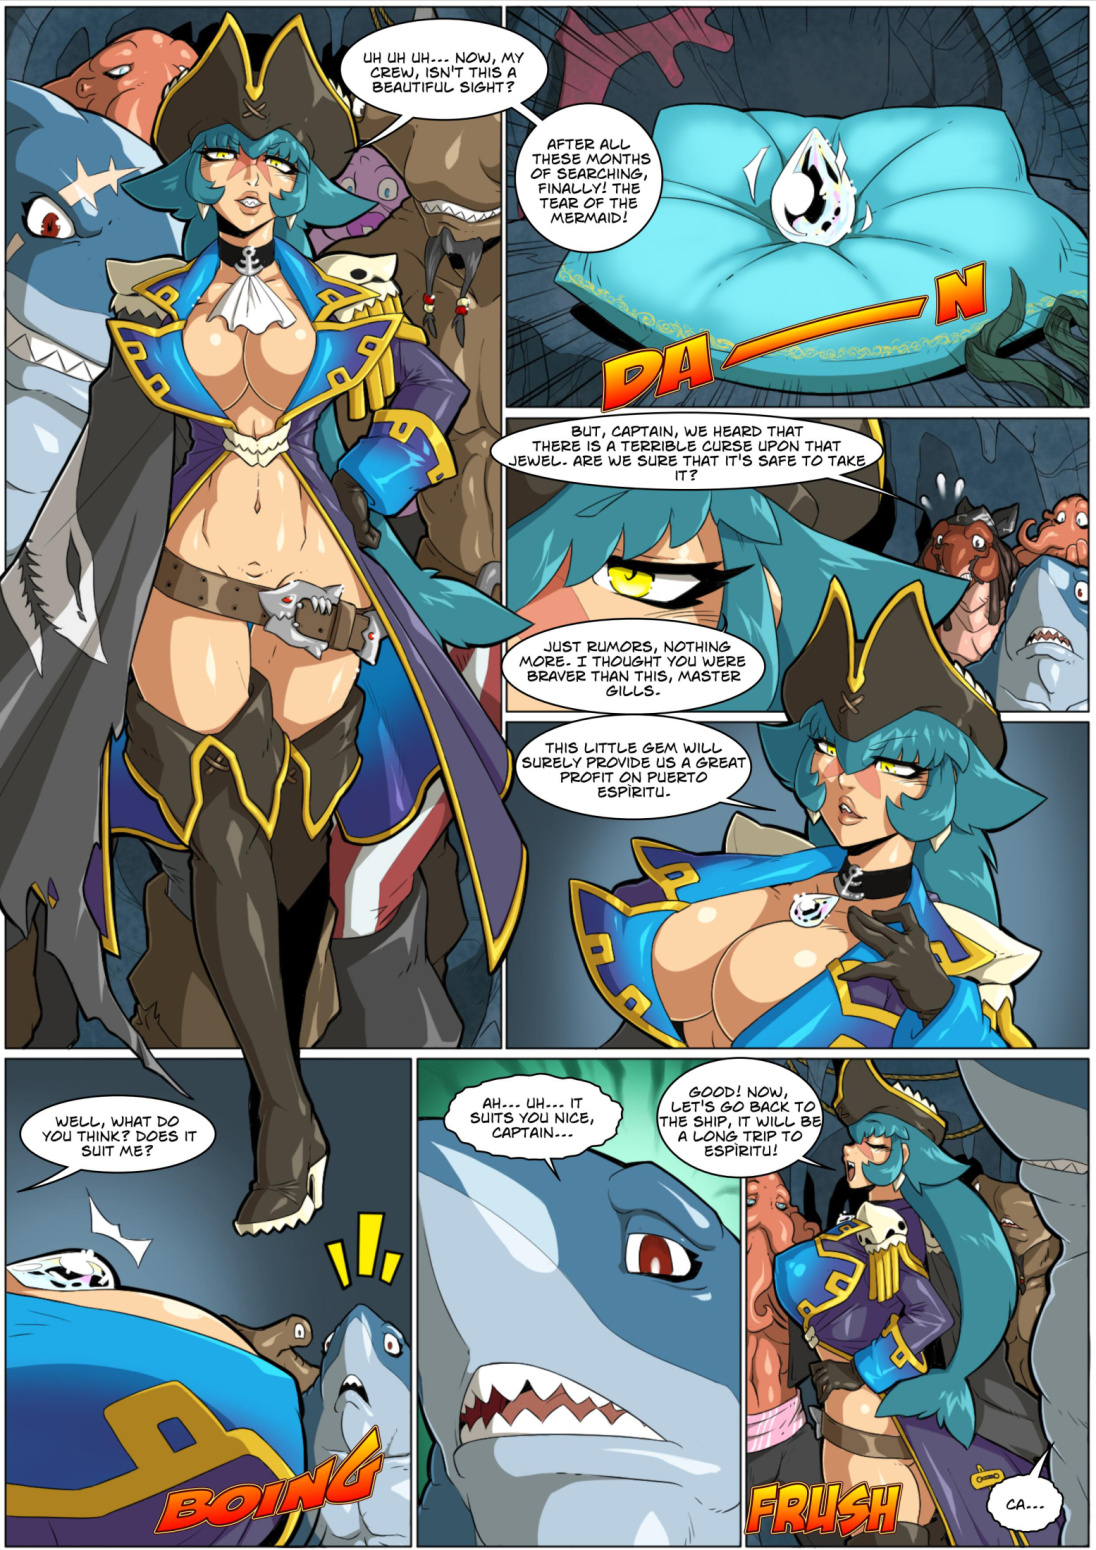 Captain Barracuda and the Tear of the Mermaid porn comics Oral sex, Anal Sex, Big Tits, Blowjob, Creampie, Cum Shots, Cum Swallow, Double Penetration, Gangbang, Group Sex, Straight, Titfuck